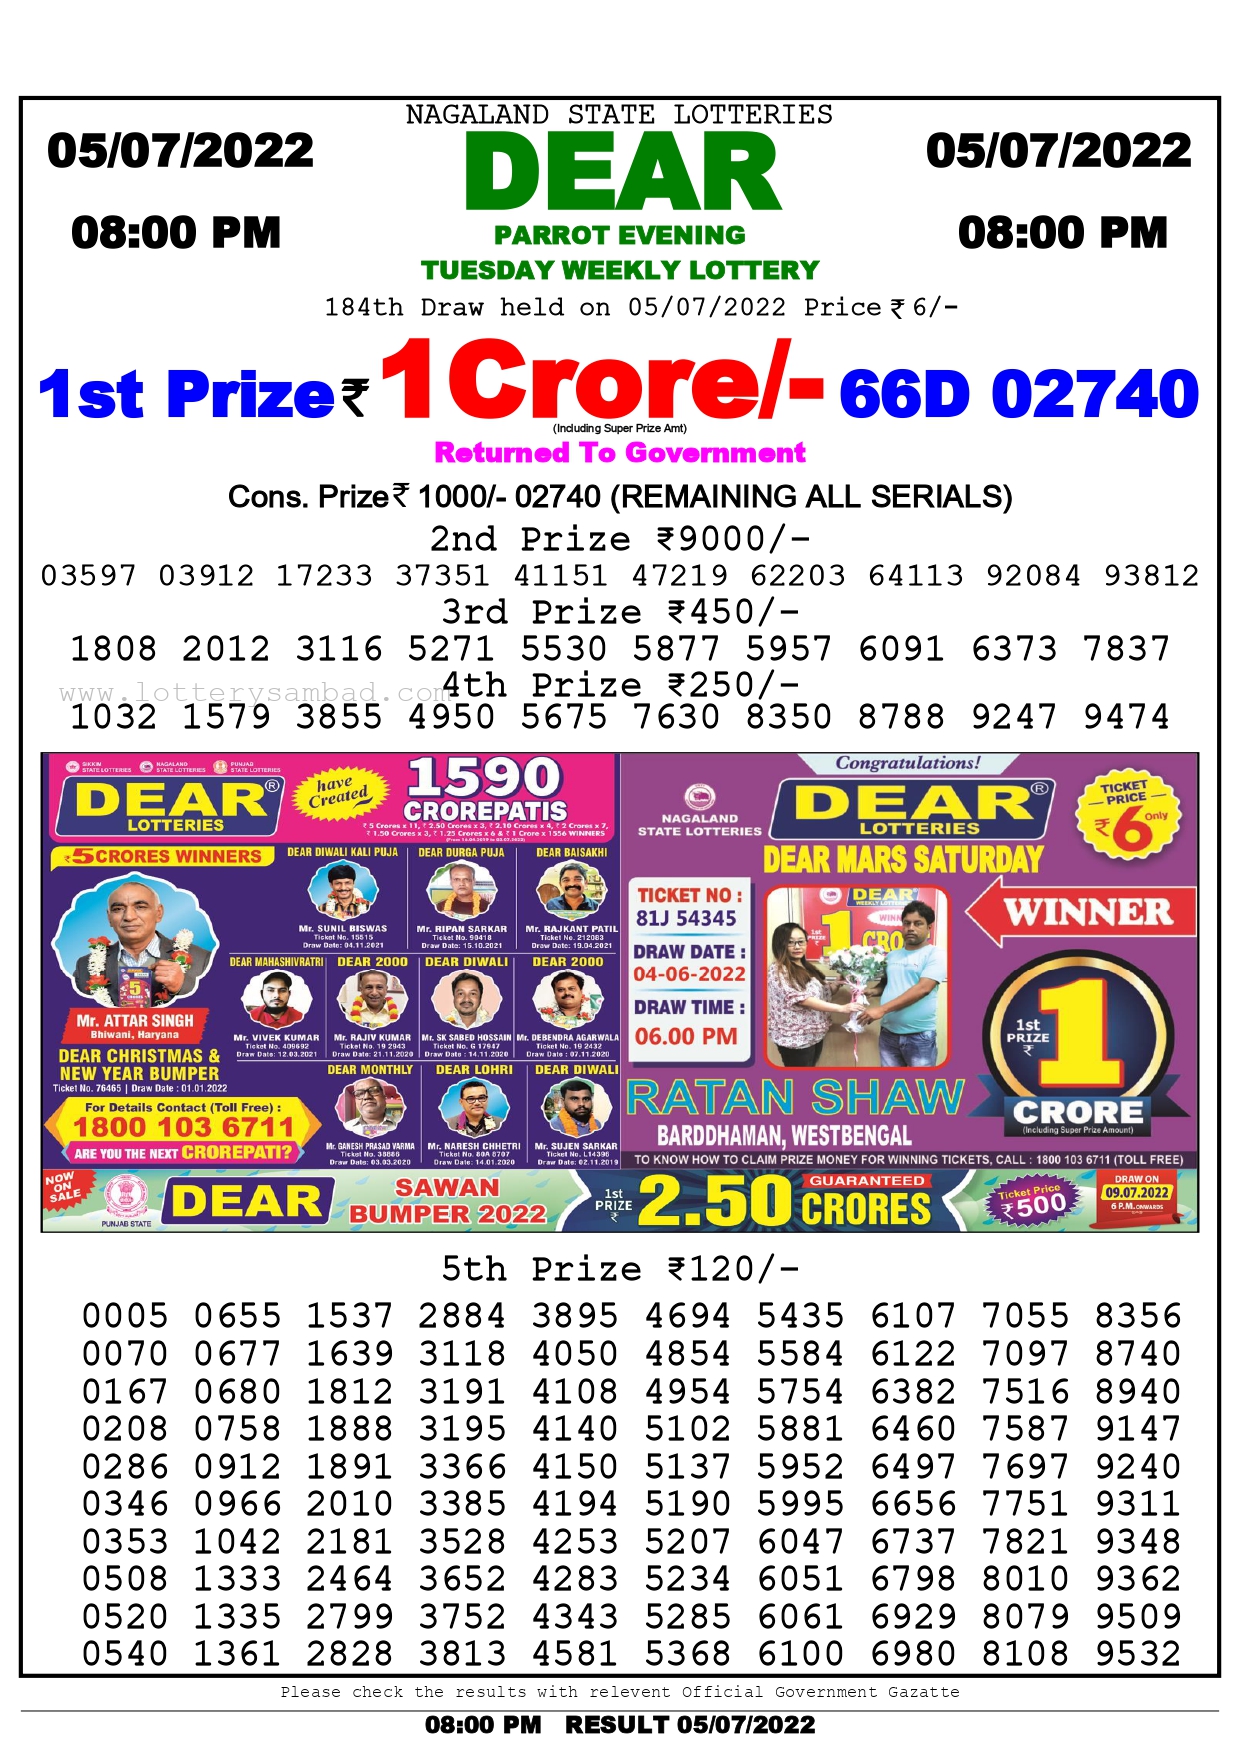 Download Result of Nagaland State Dear 6 Draw 05-07-2022 Draw at 8:00Pm